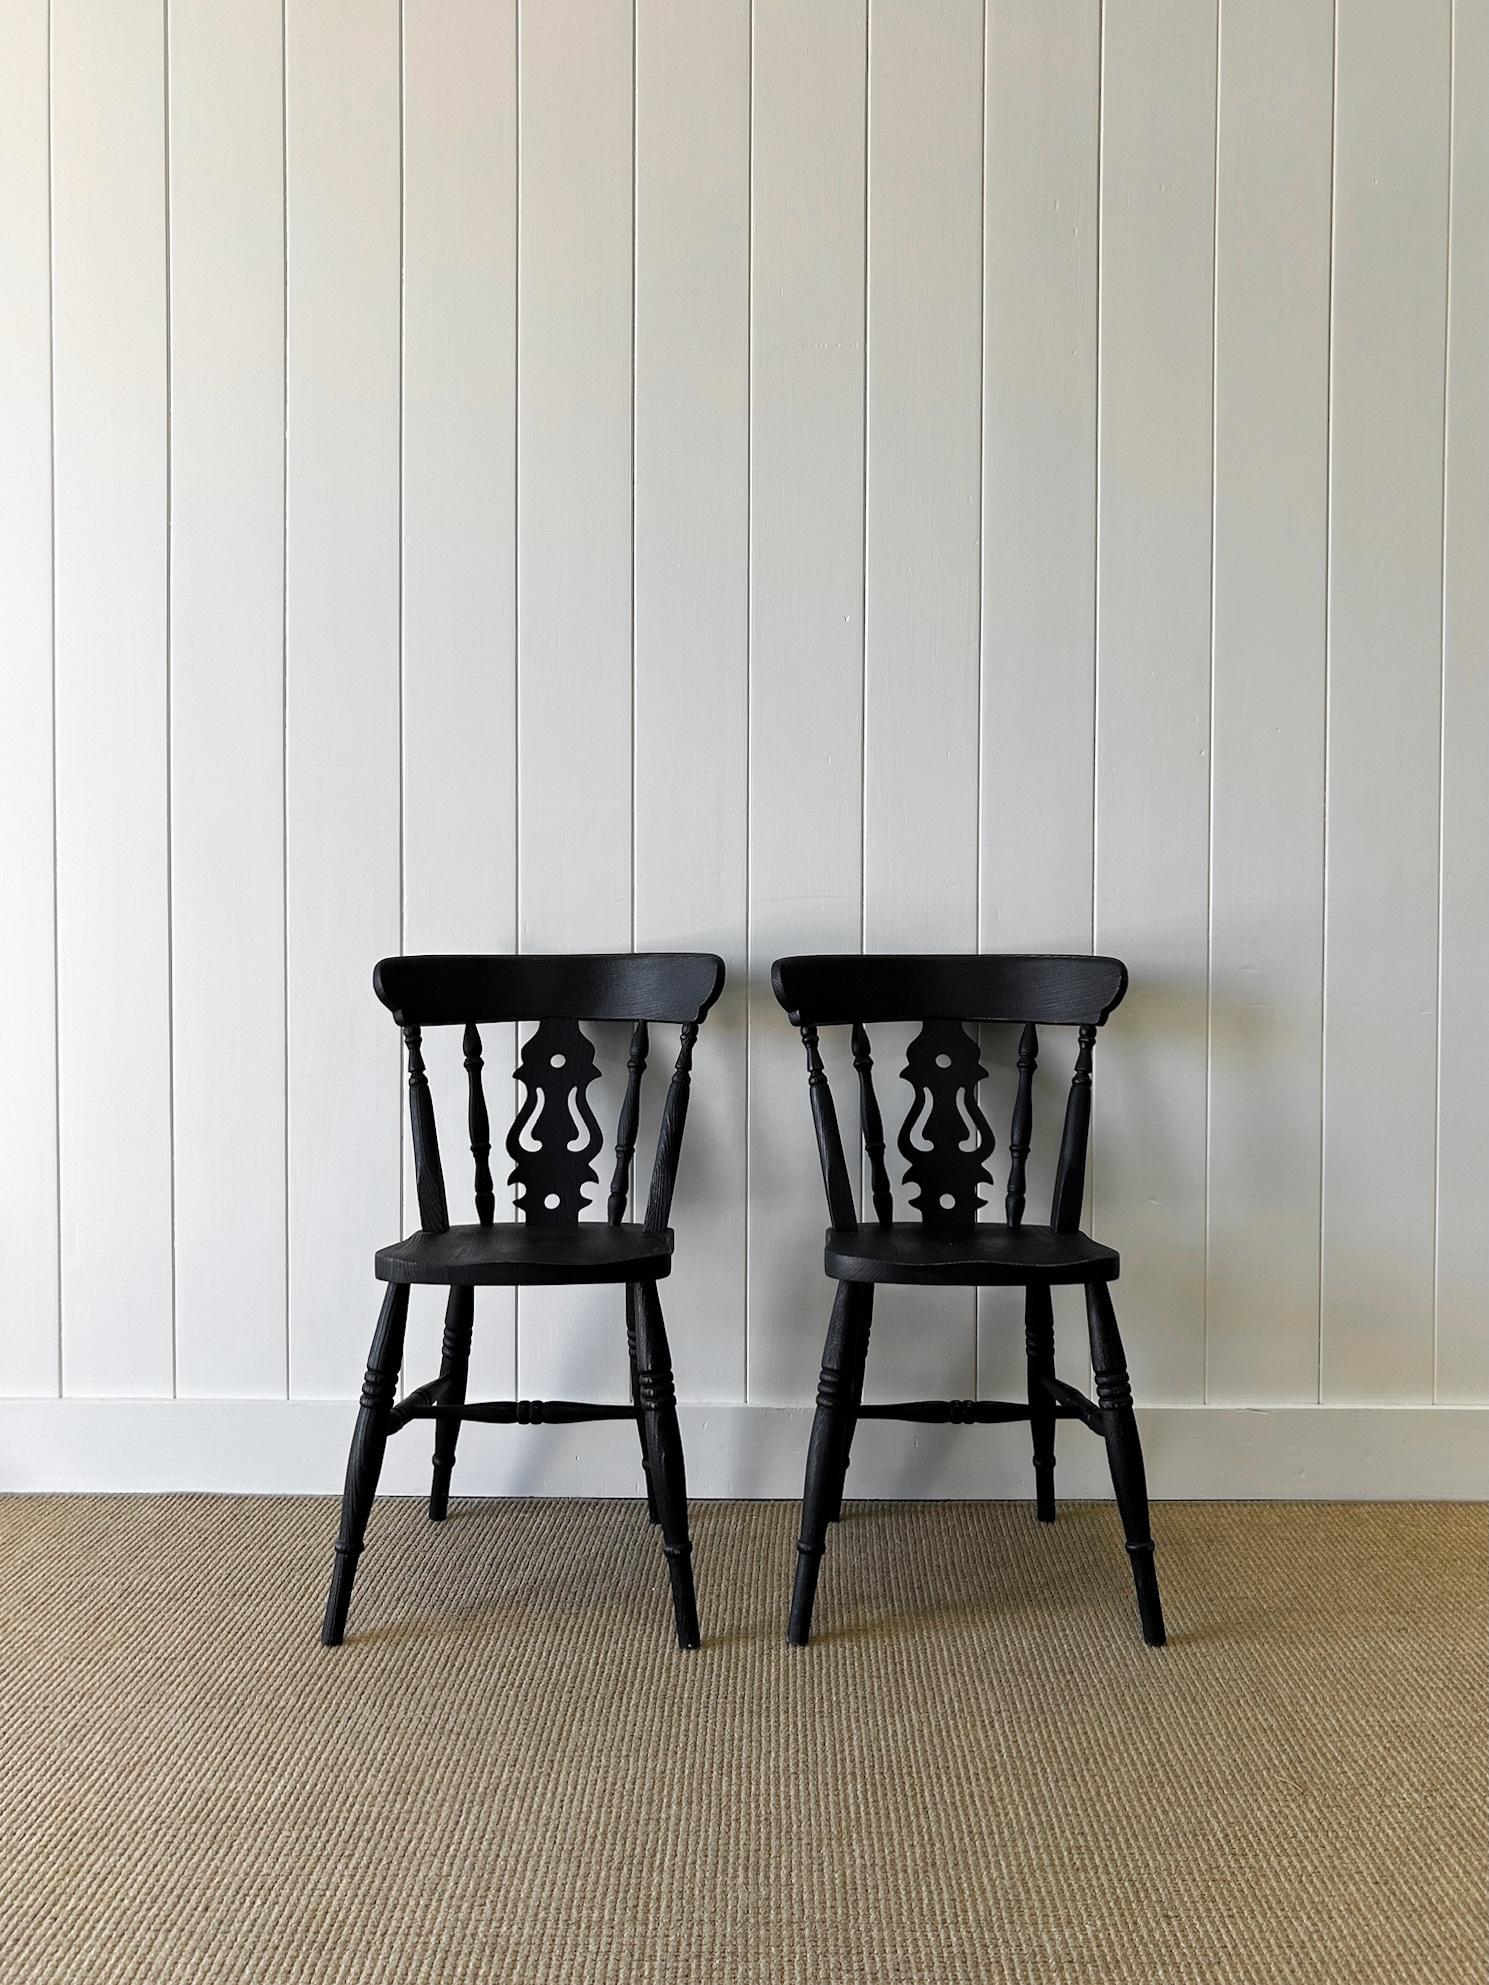 British A Vintage Set of 6 Fiddleback Chairs Painted Black For Sale